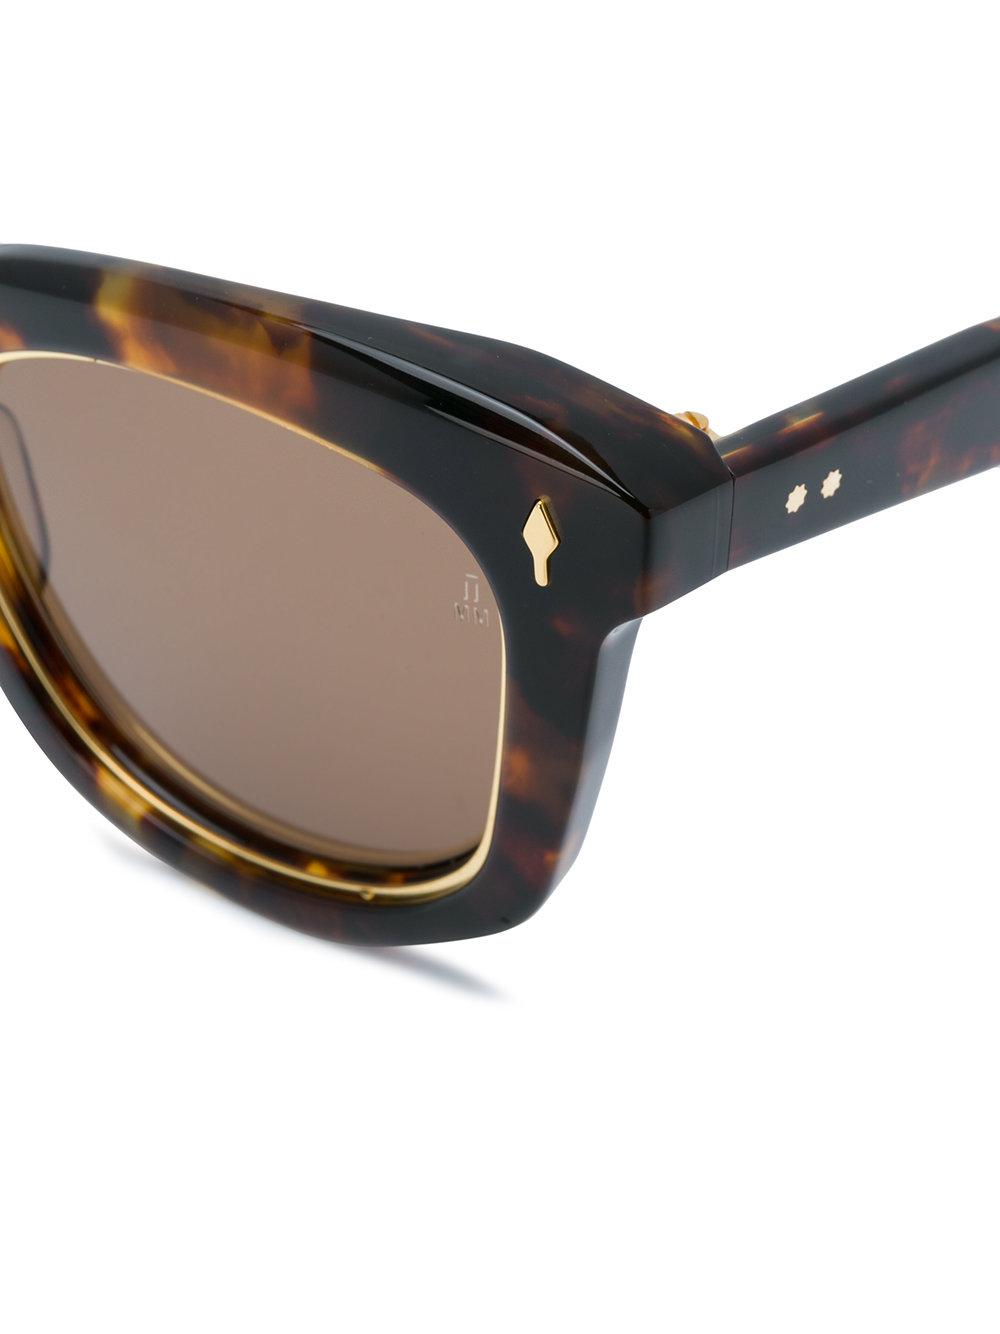 Jacques Marie Mage Pasolini Sunglasses in Brown | Lyst